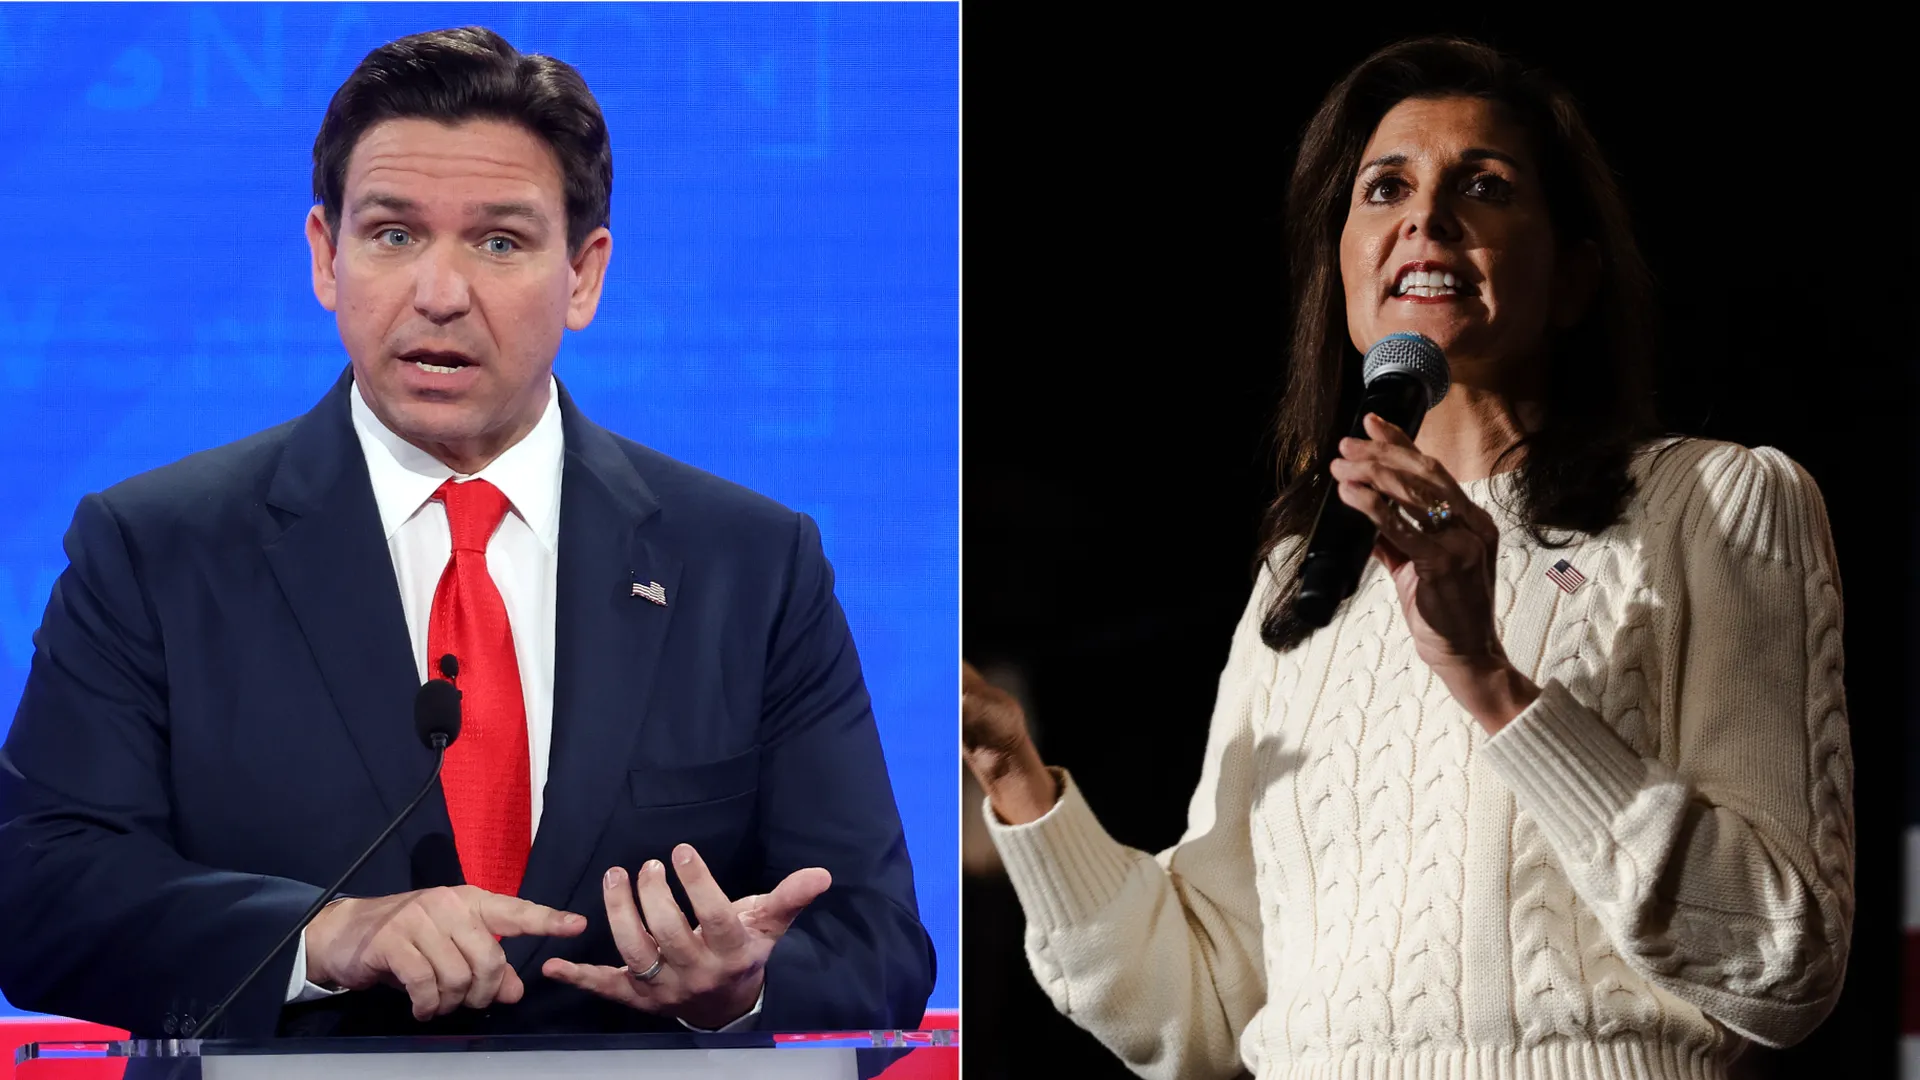 DeSantis and Haley take aim at Trump in back-to-back Iowa town halls